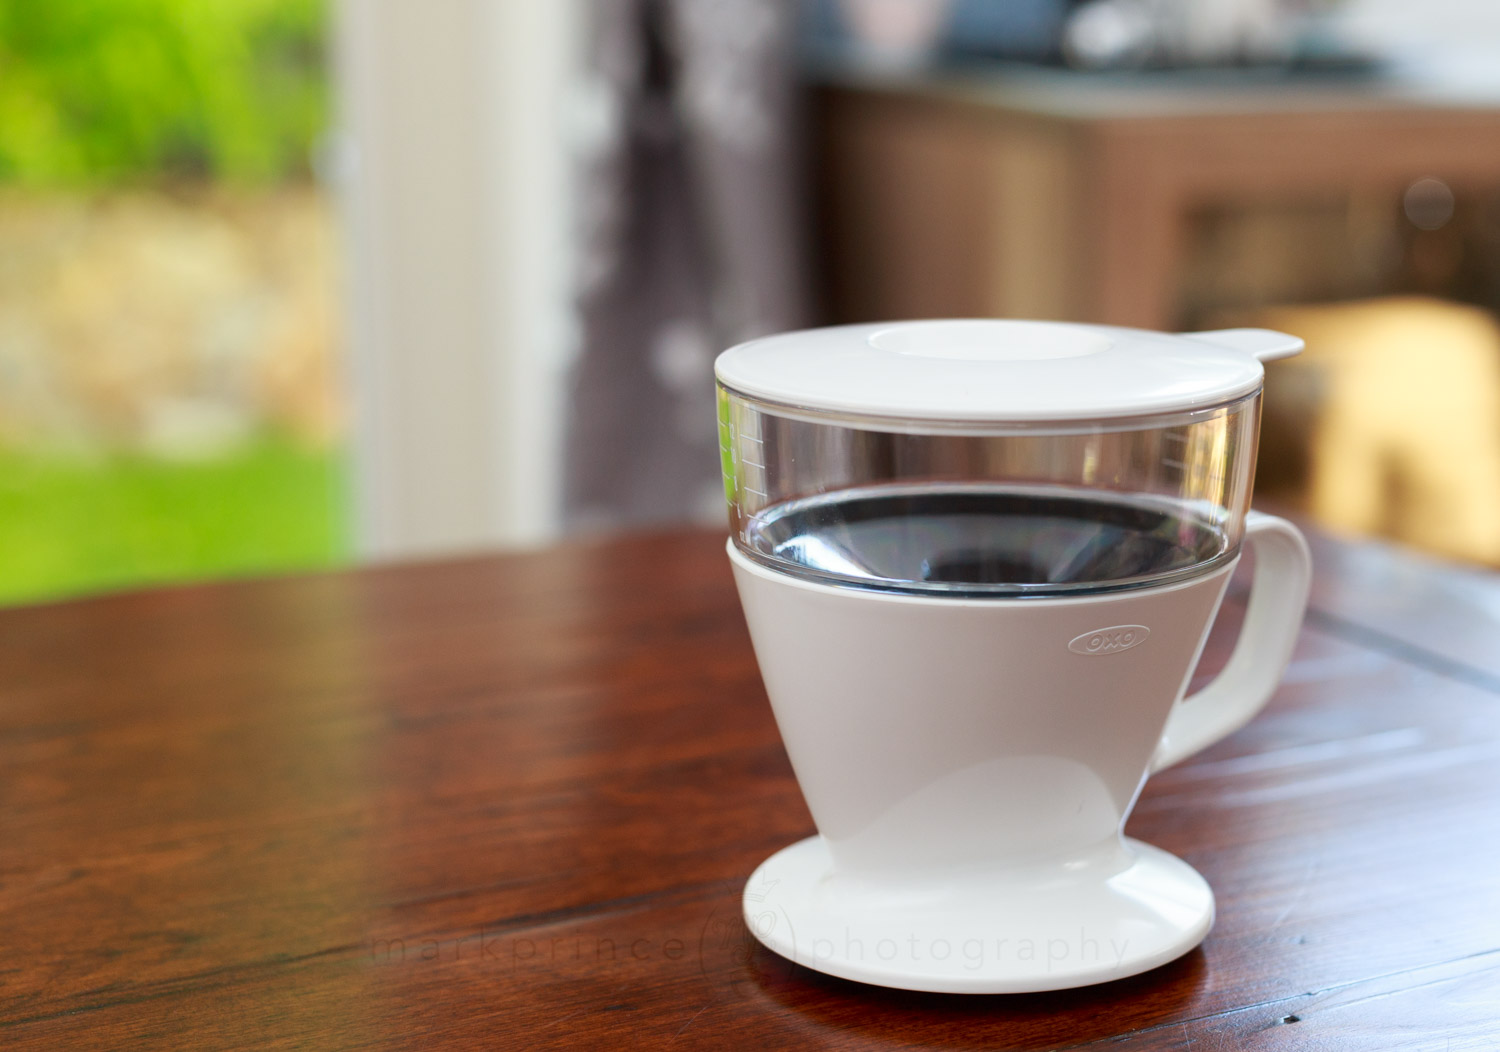 OXO Pour Over Coffee Maker